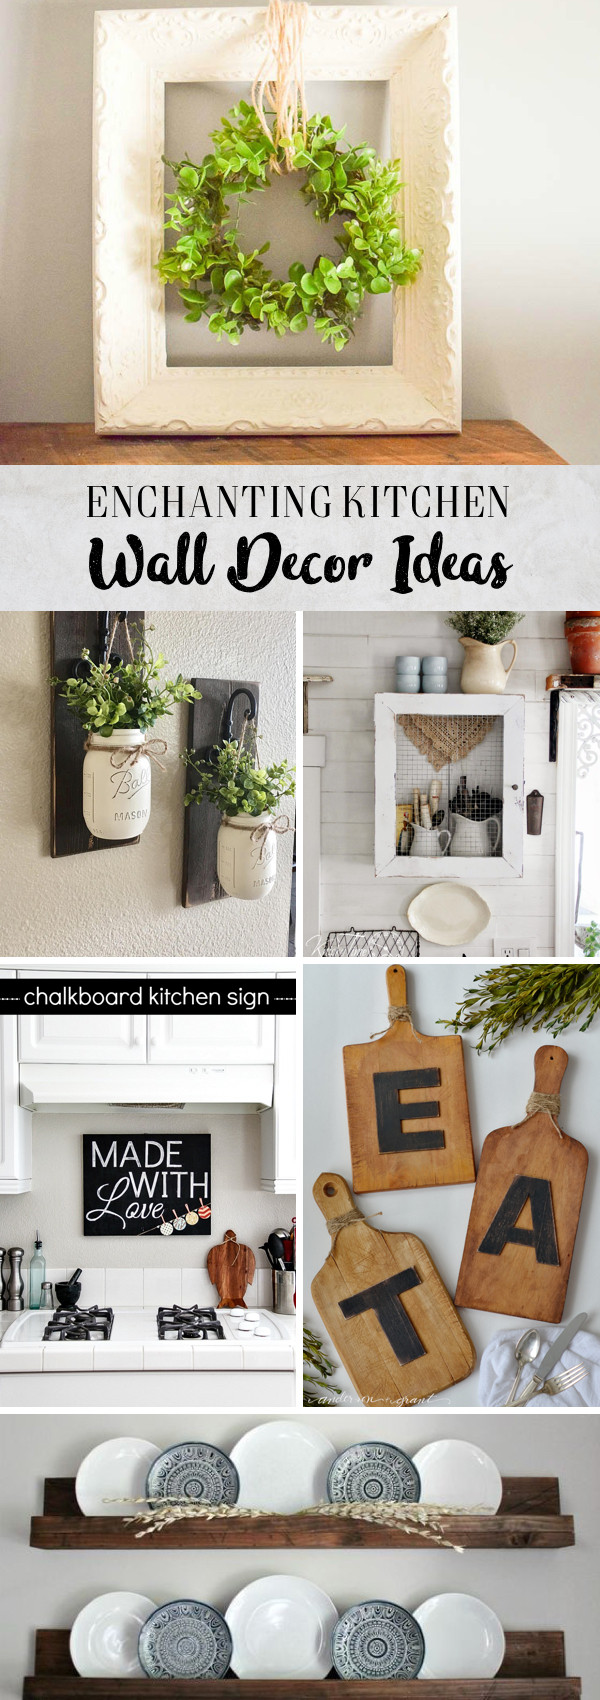 Decor For Kitchen Wall
 30 Enchanting Kitchen Wall Decor Ideas That are Oozing